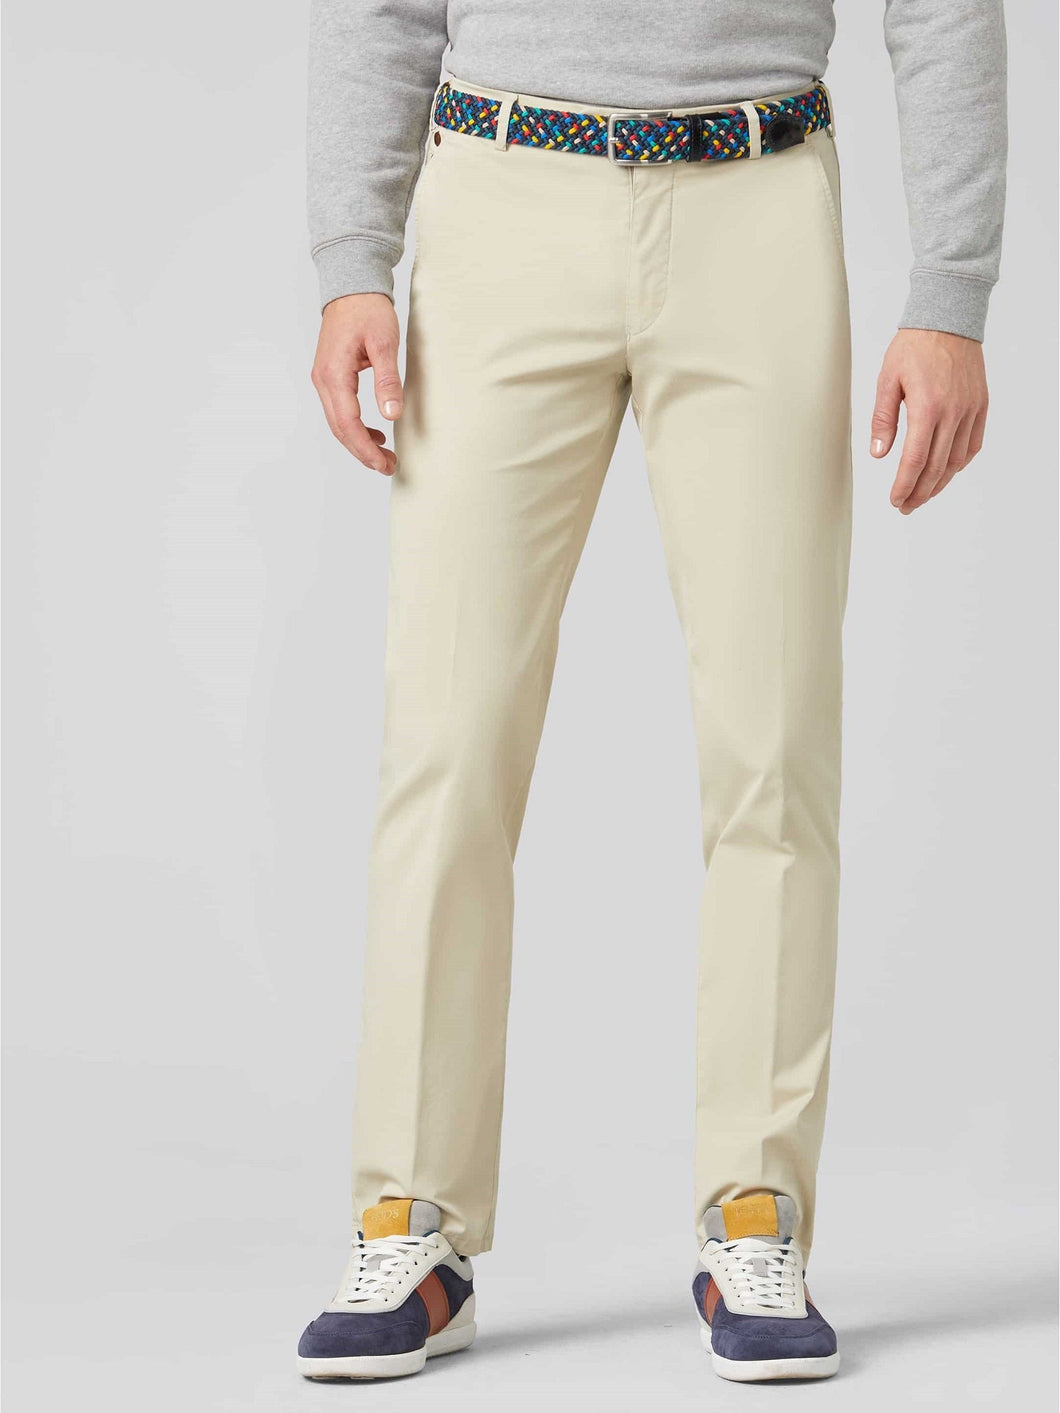 30% OFF - MEYER Trousers - Roma 3001 Summer-Weight Fairtrade Cotton Chinos - Beige - Size: 30 LONG